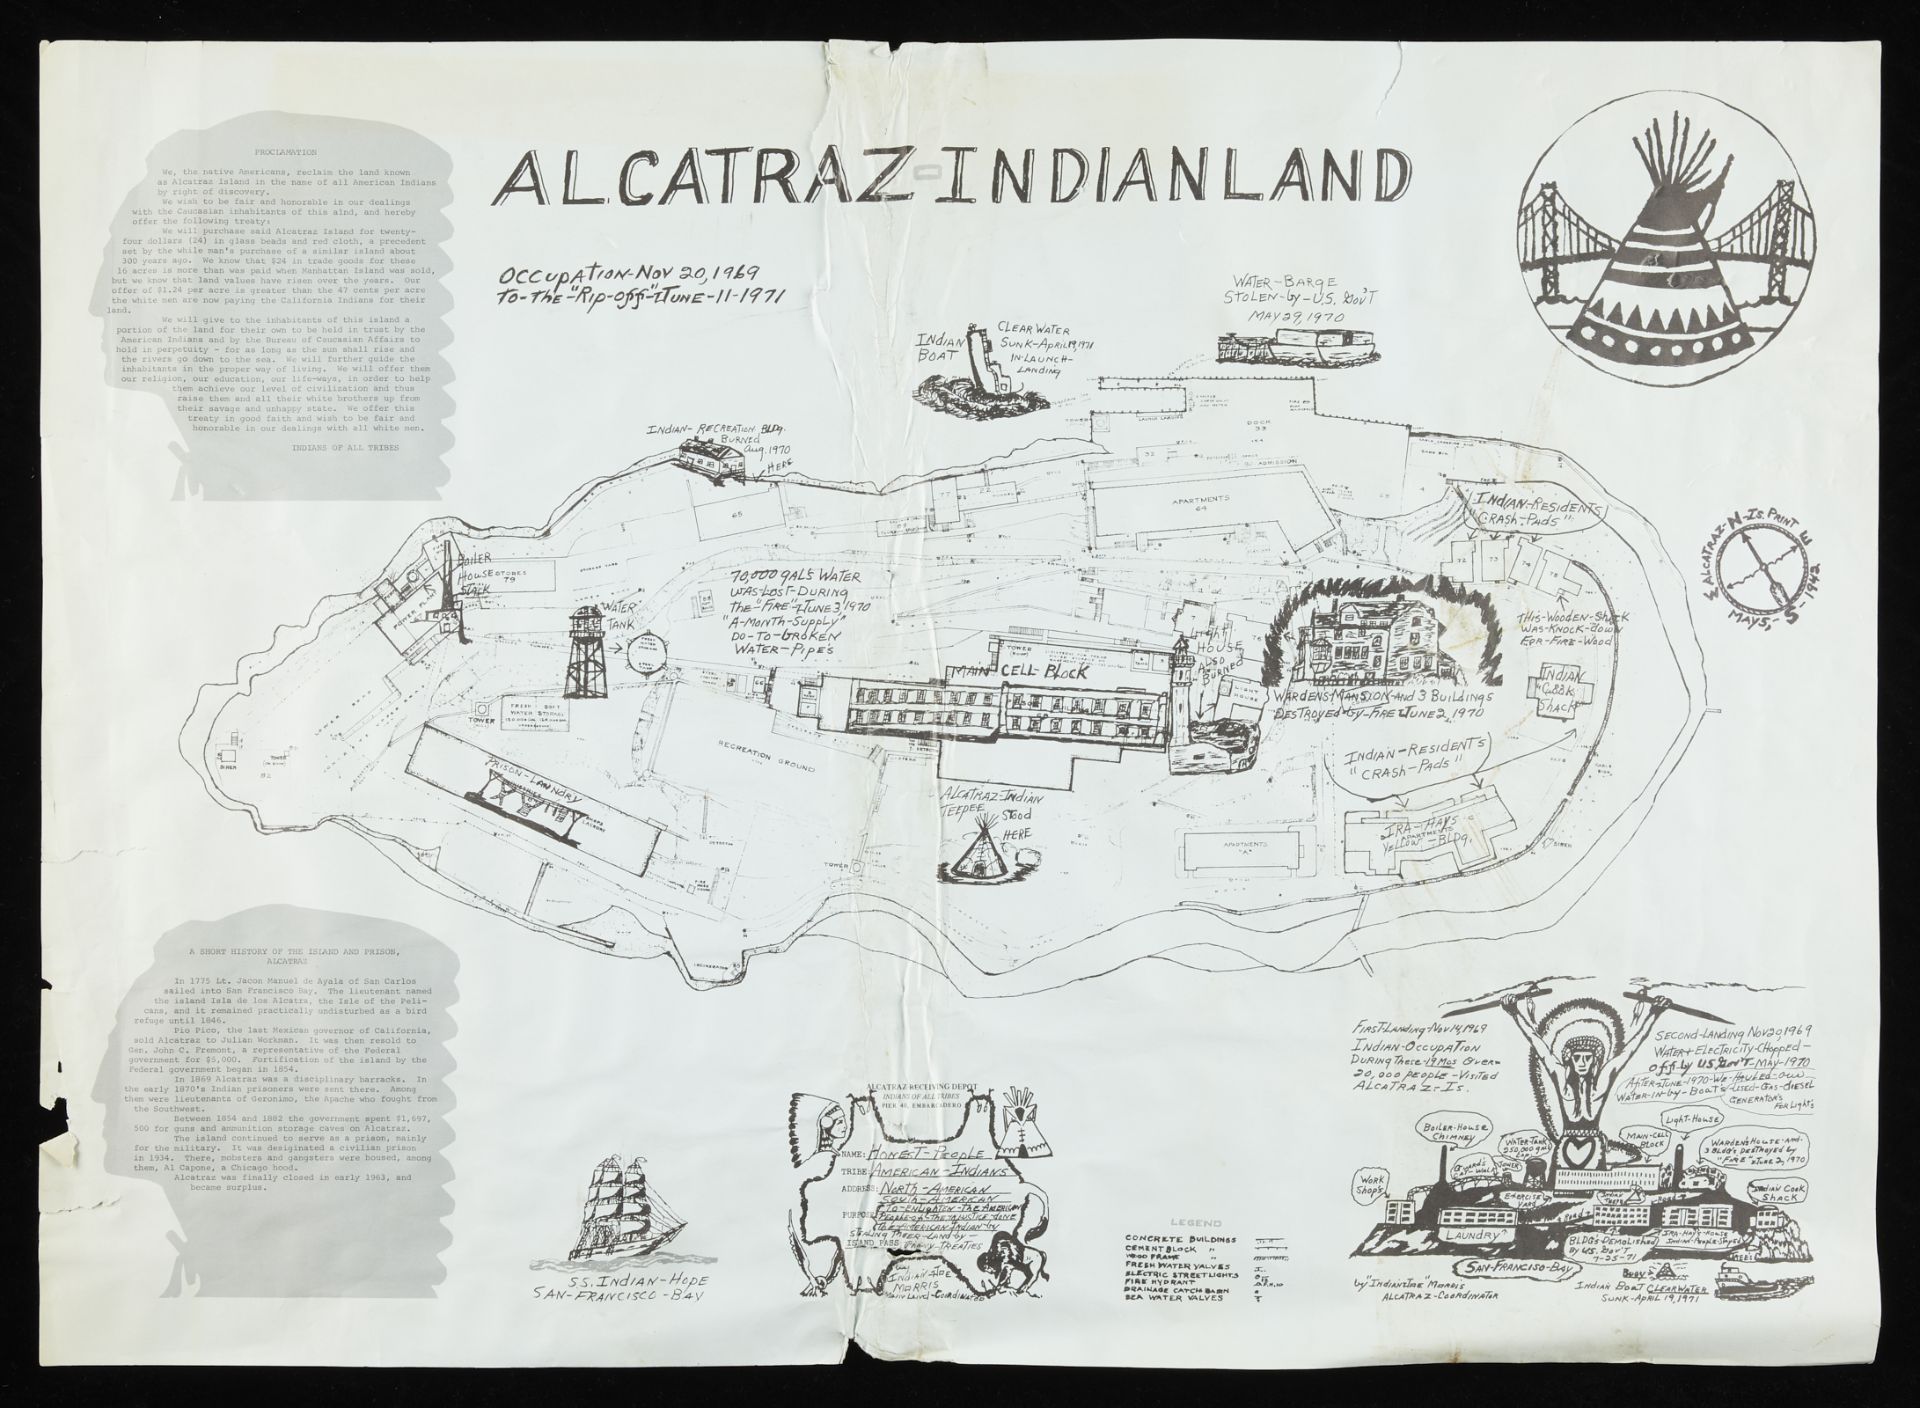 "Alcatraz - Indian Land" Occupation Protest Flyer - Image 3 of 8